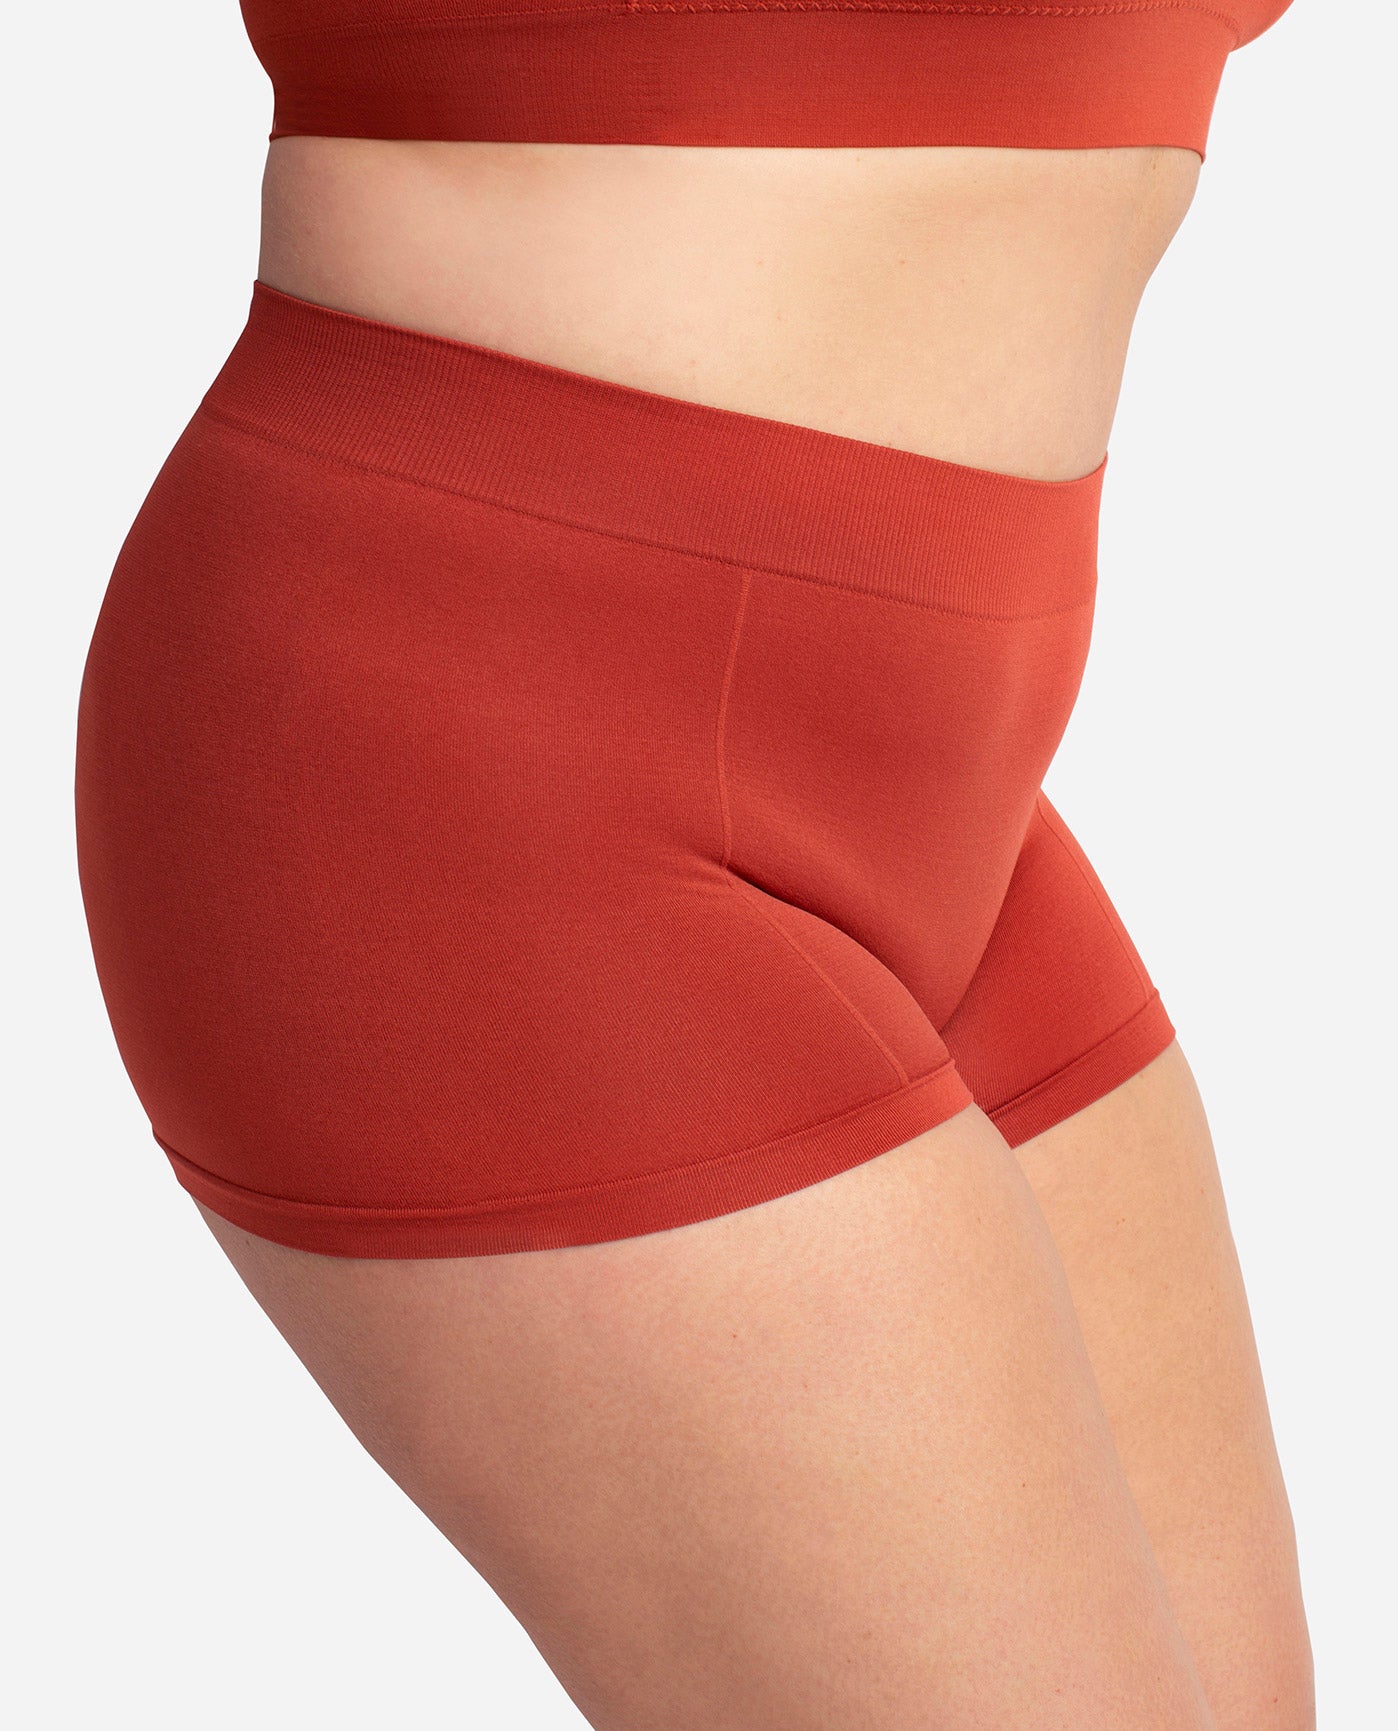 Women Basic Solid Color Seamless Dance Exercise Mini Panties Boy Shorts  Brief Spankies